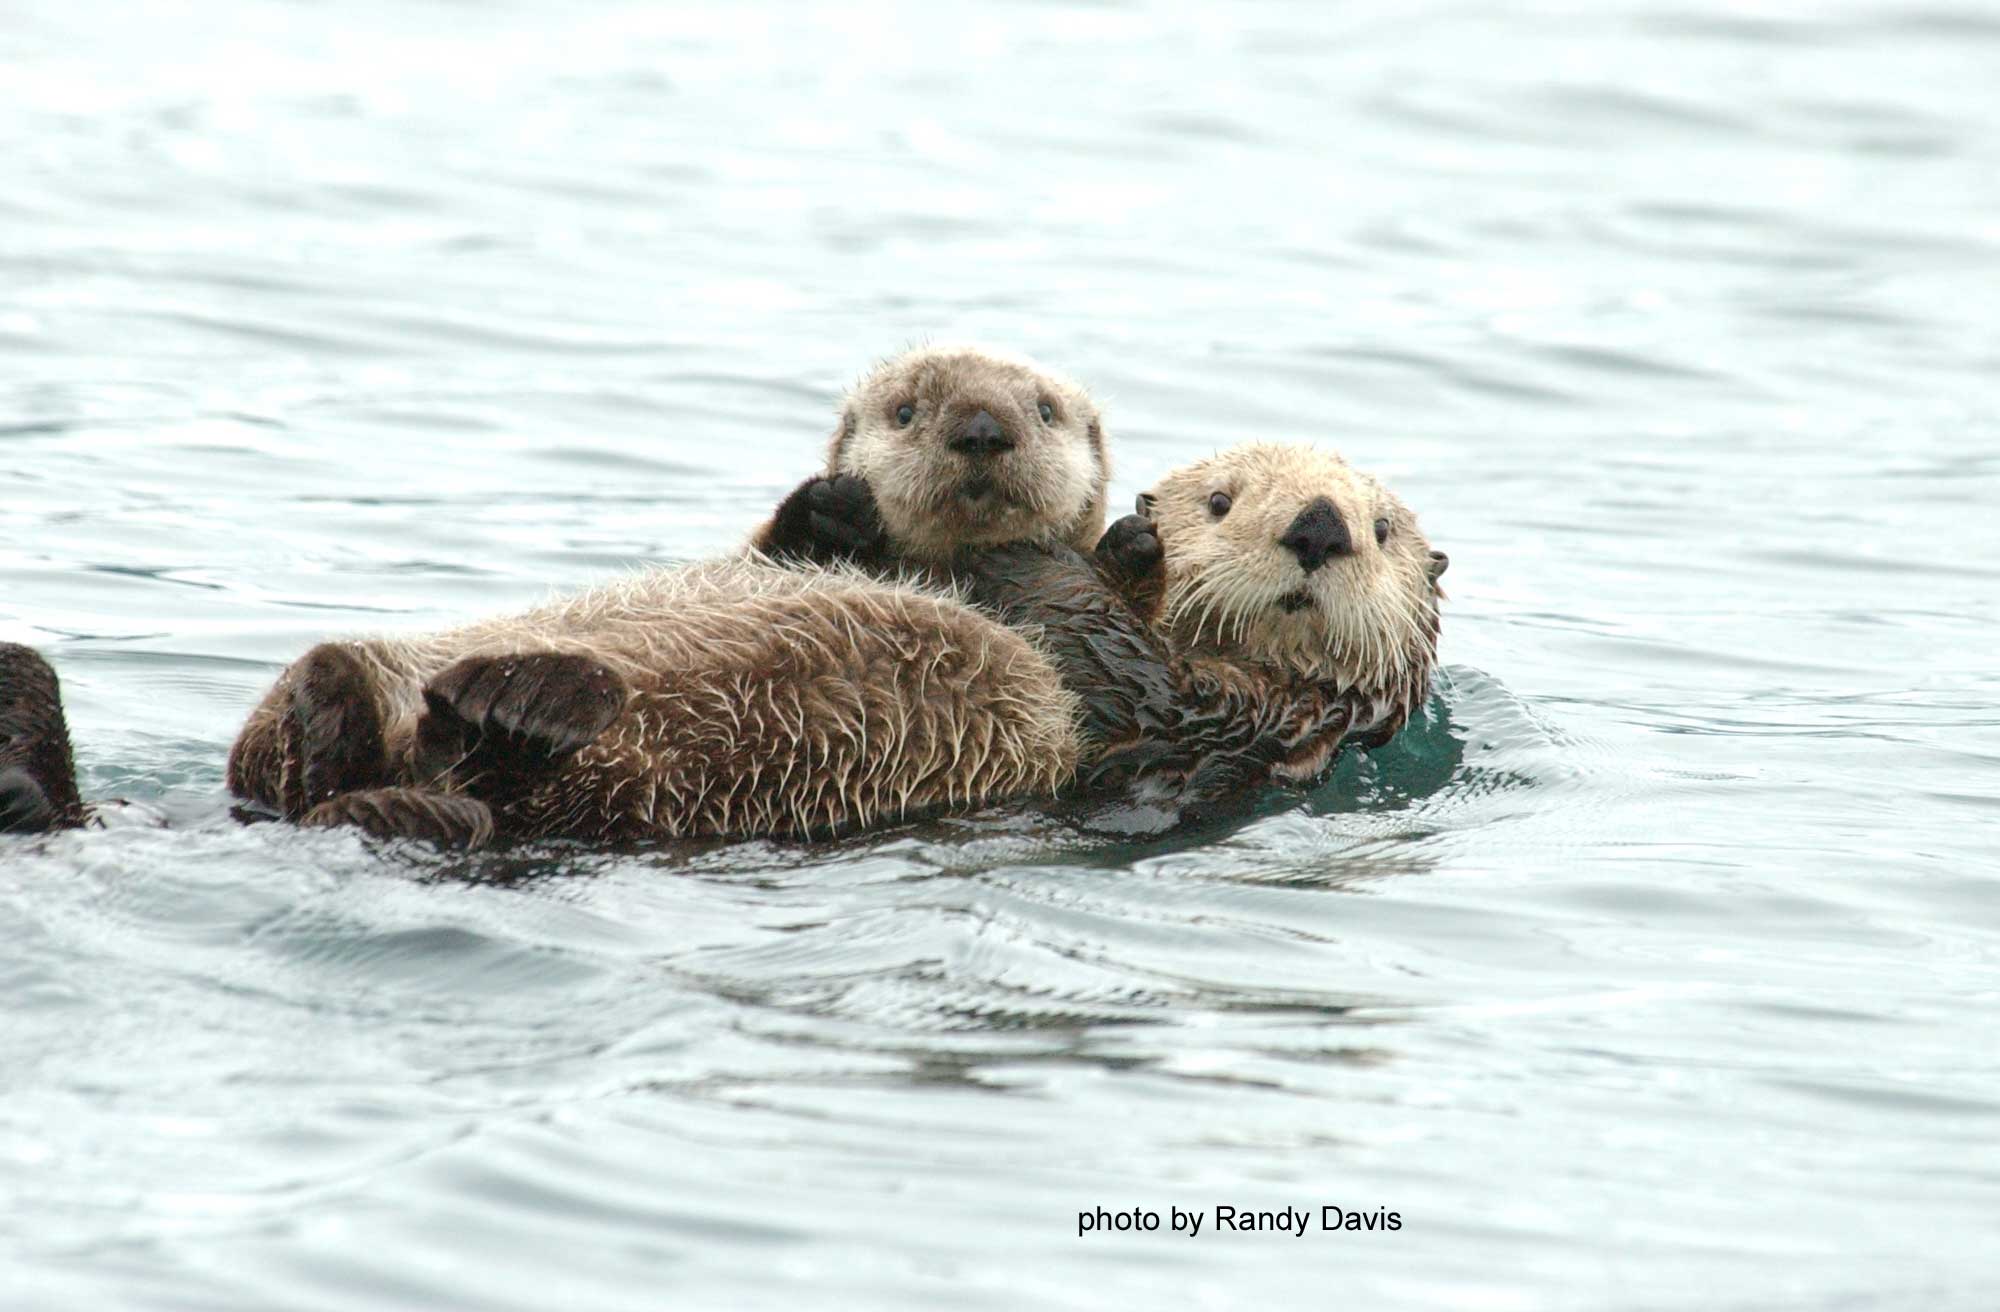 Sea Otter and Nearshore Marine Ecology Research Project